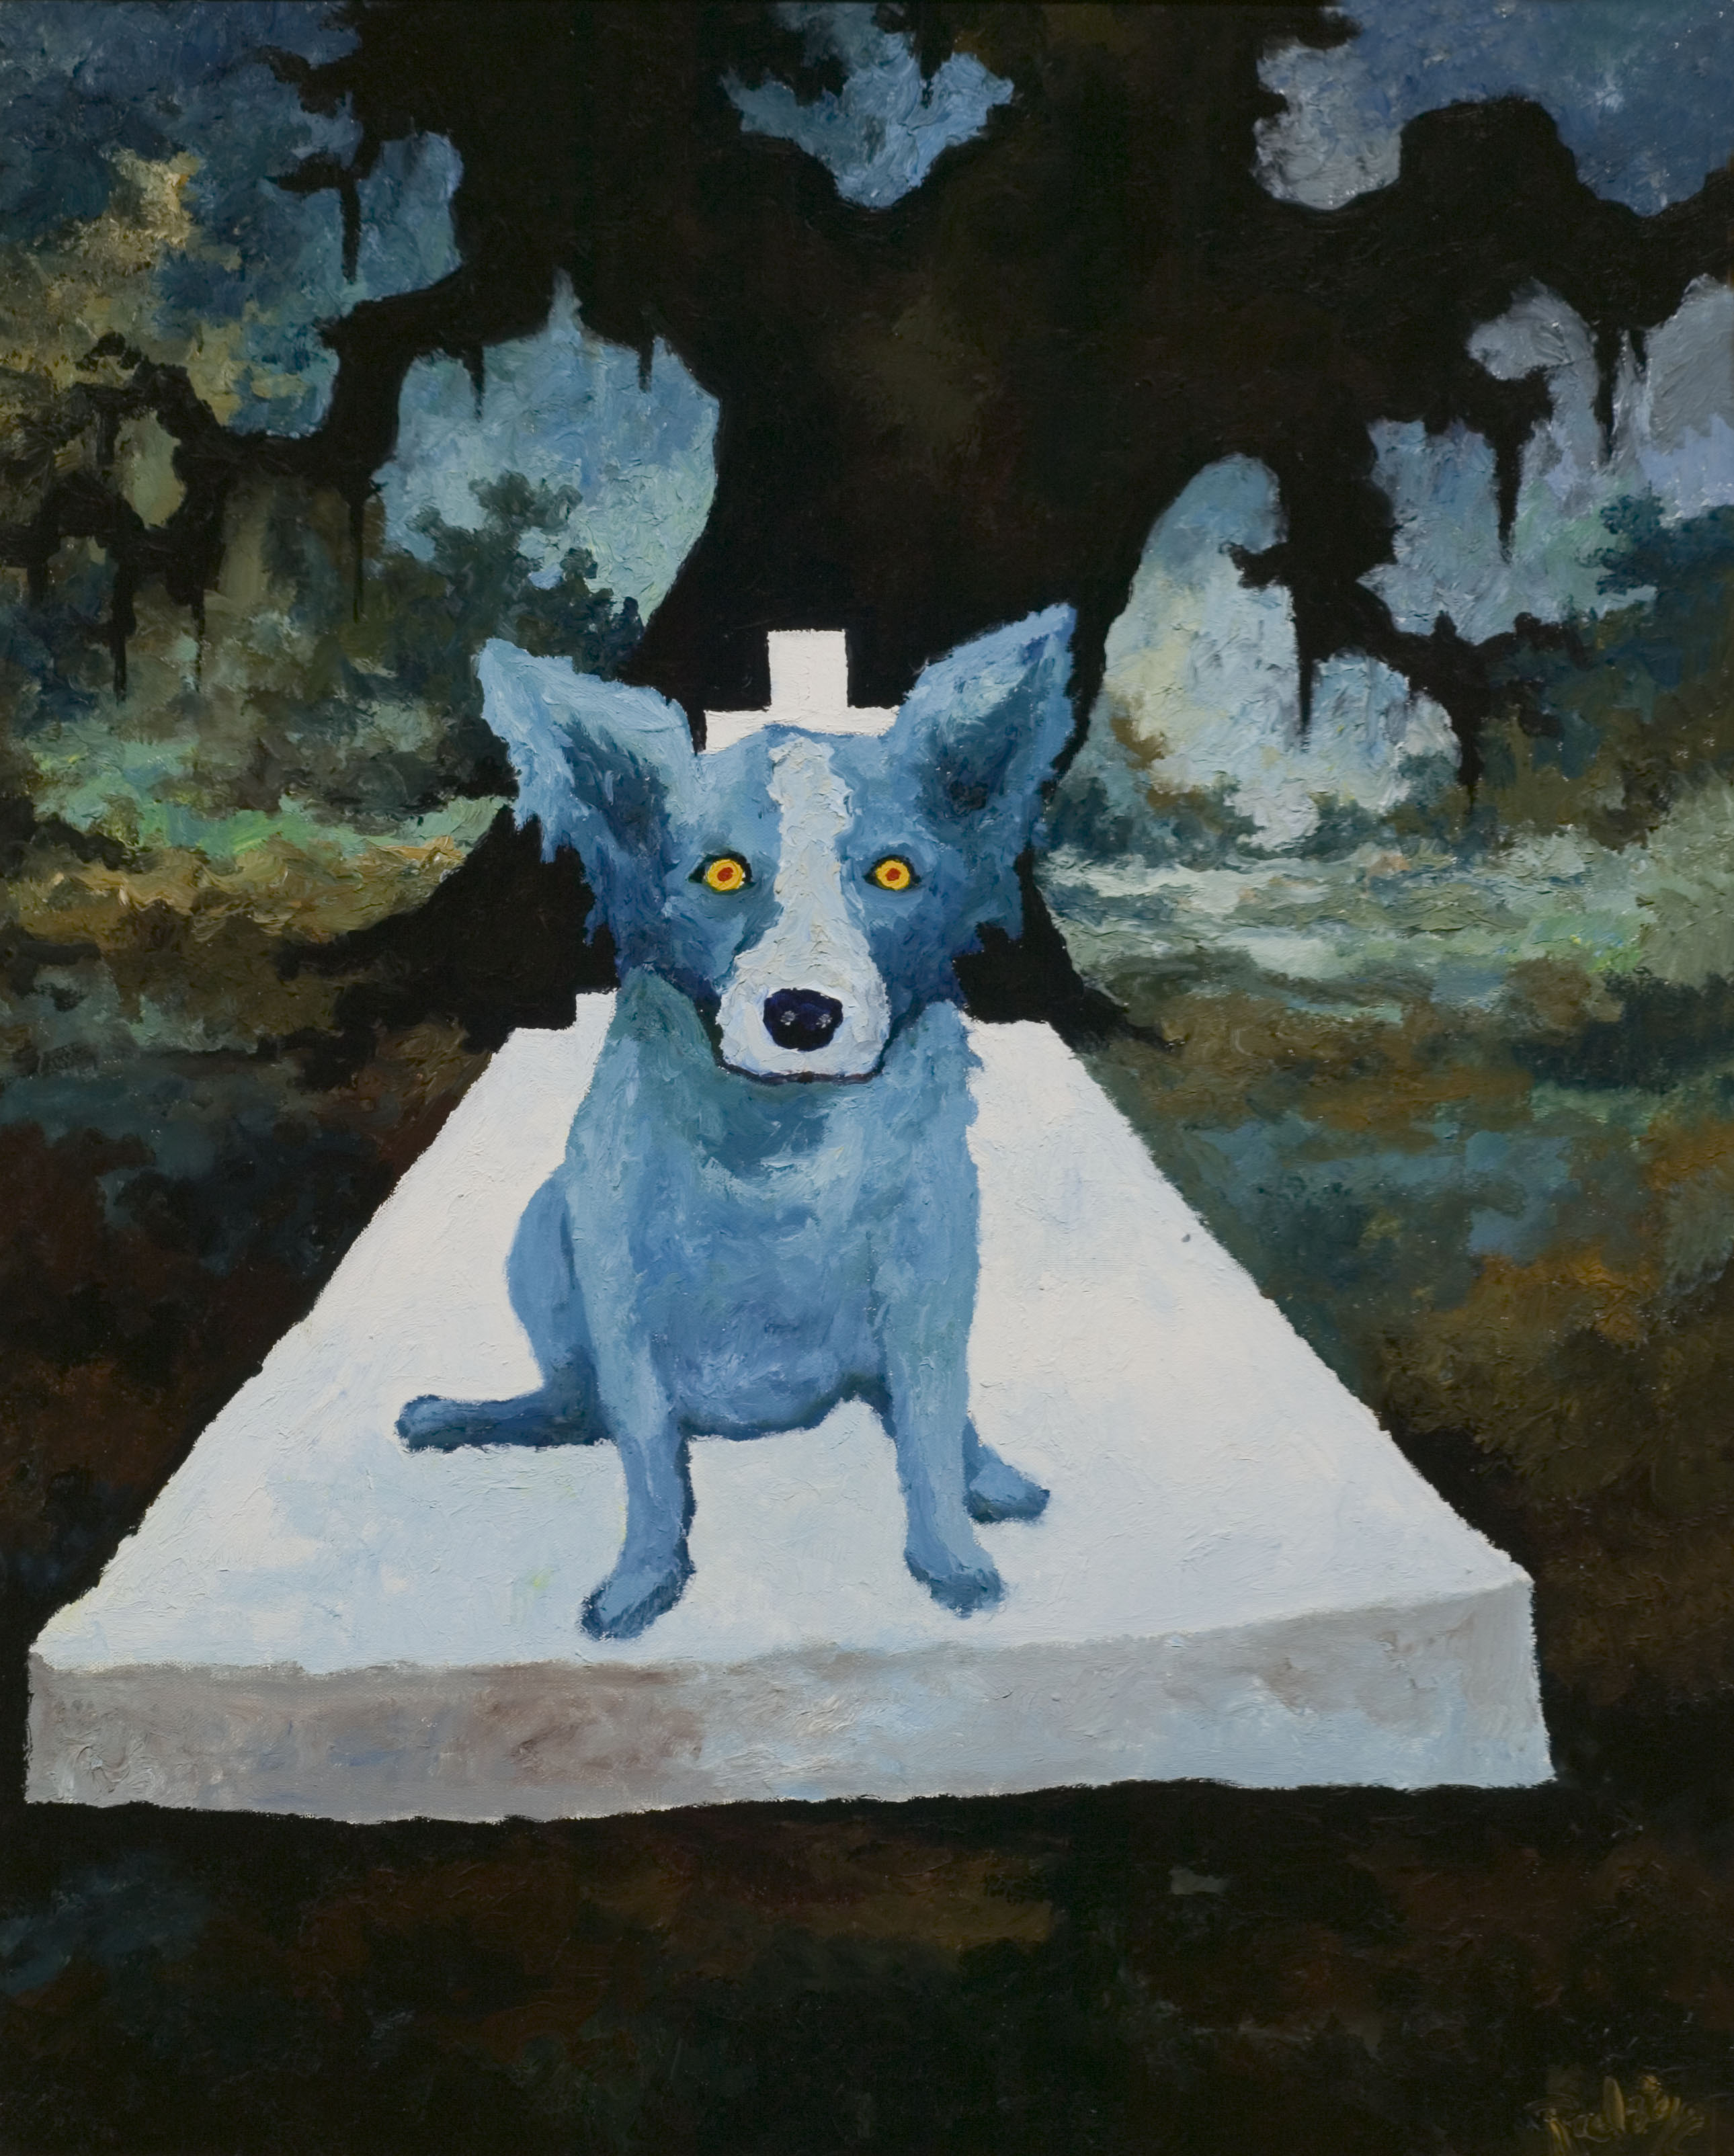 George Rodrigue S Louisiana Cajuns Blue Dogs And Beyond Katrina New Orleans Museum Of Art